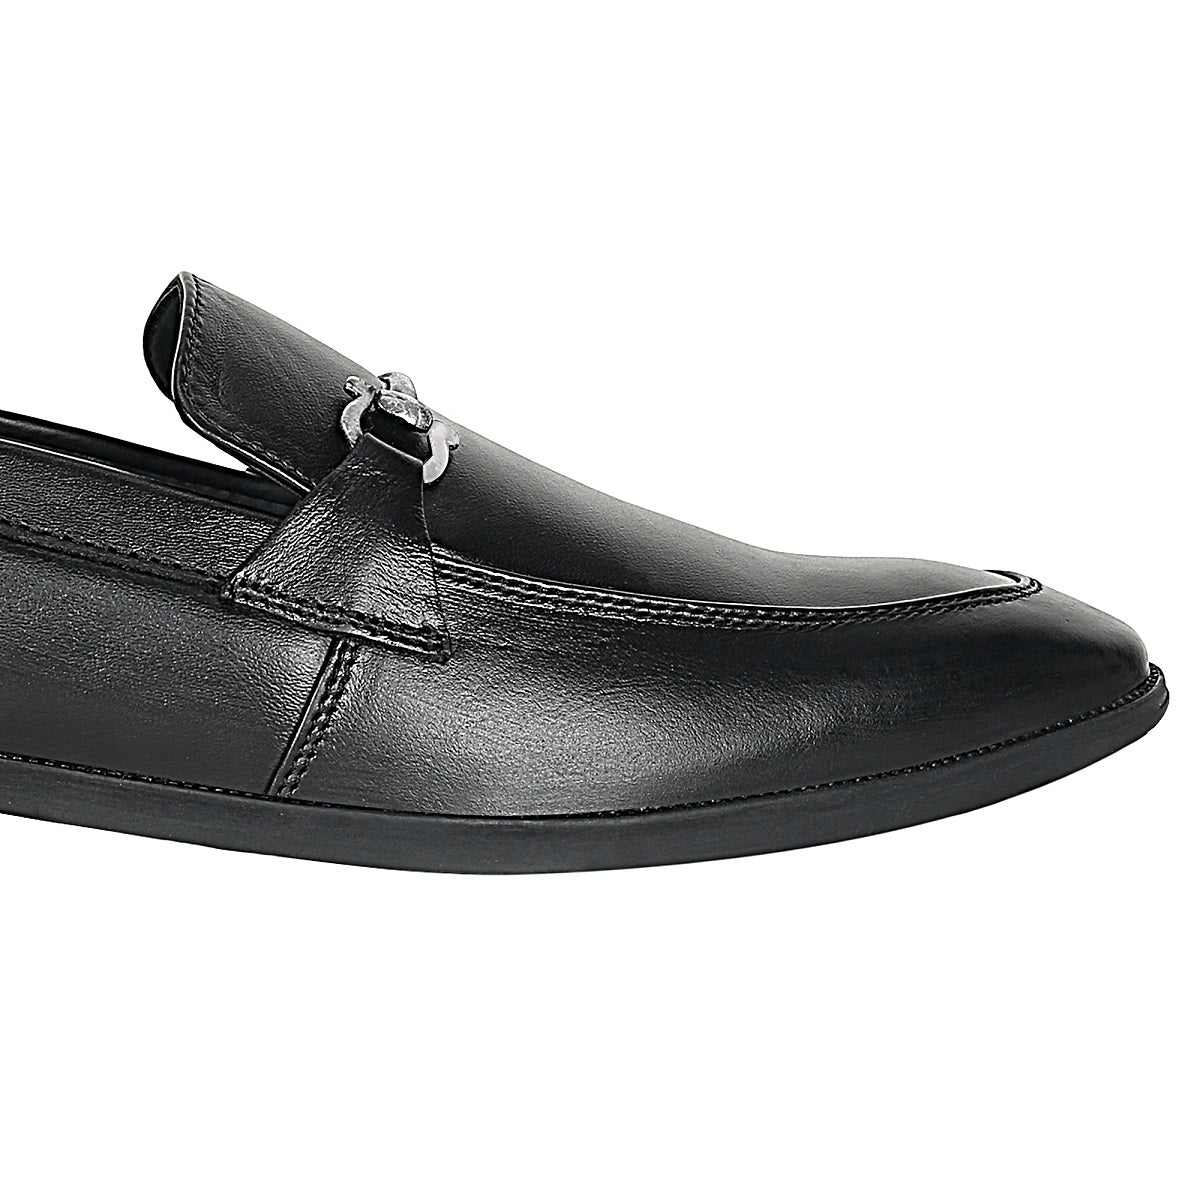 Penny Loafers for Men - Defective